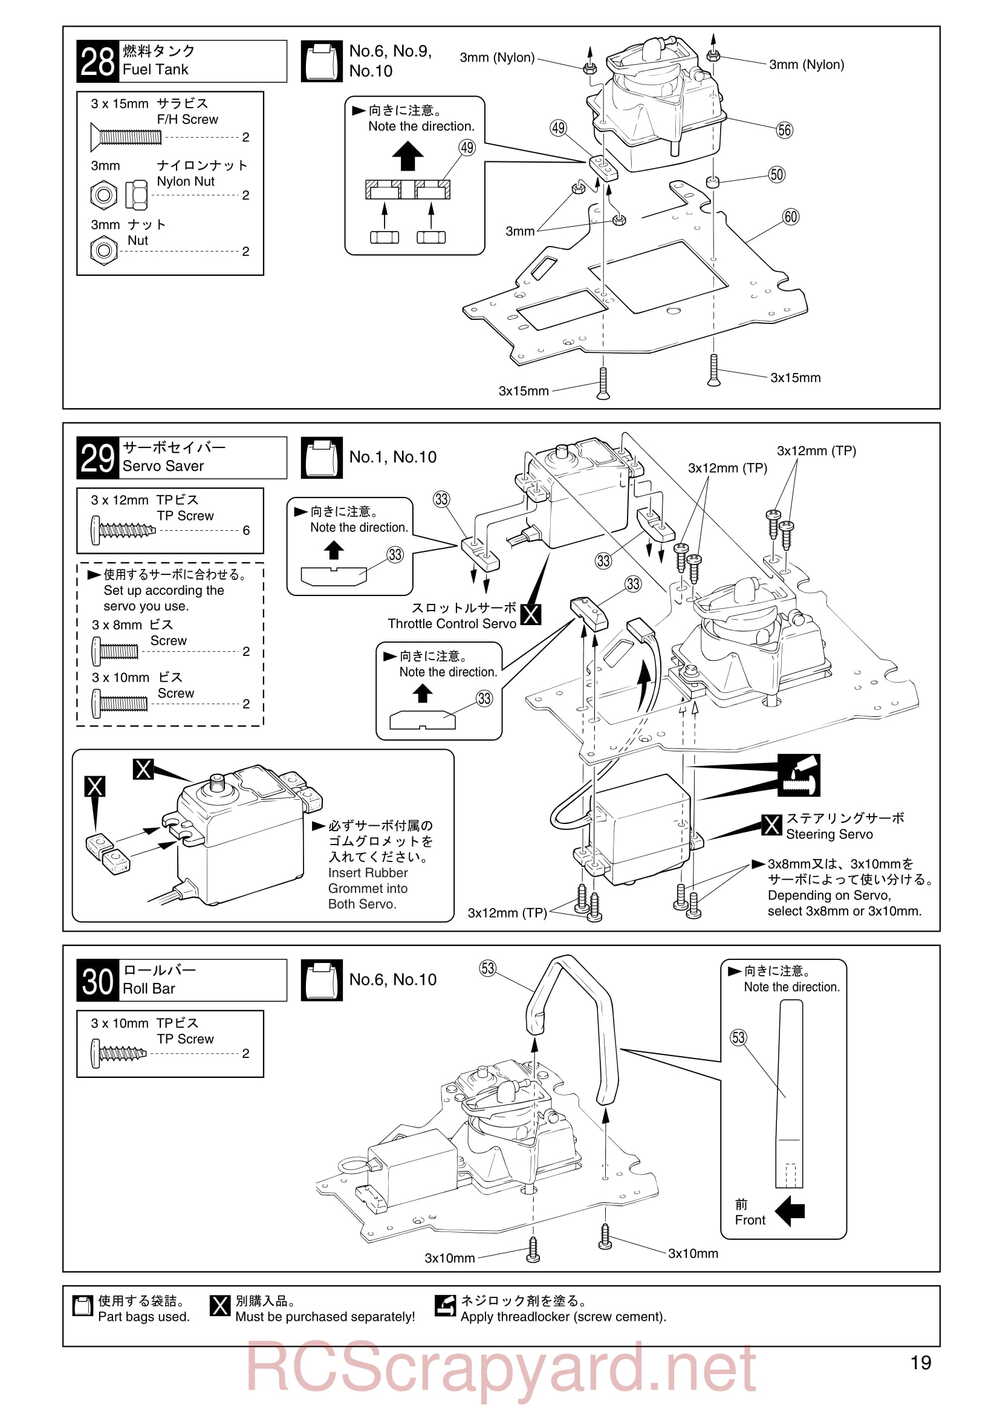 Kyosho - 31011 - V-One R - Manual - Page 19